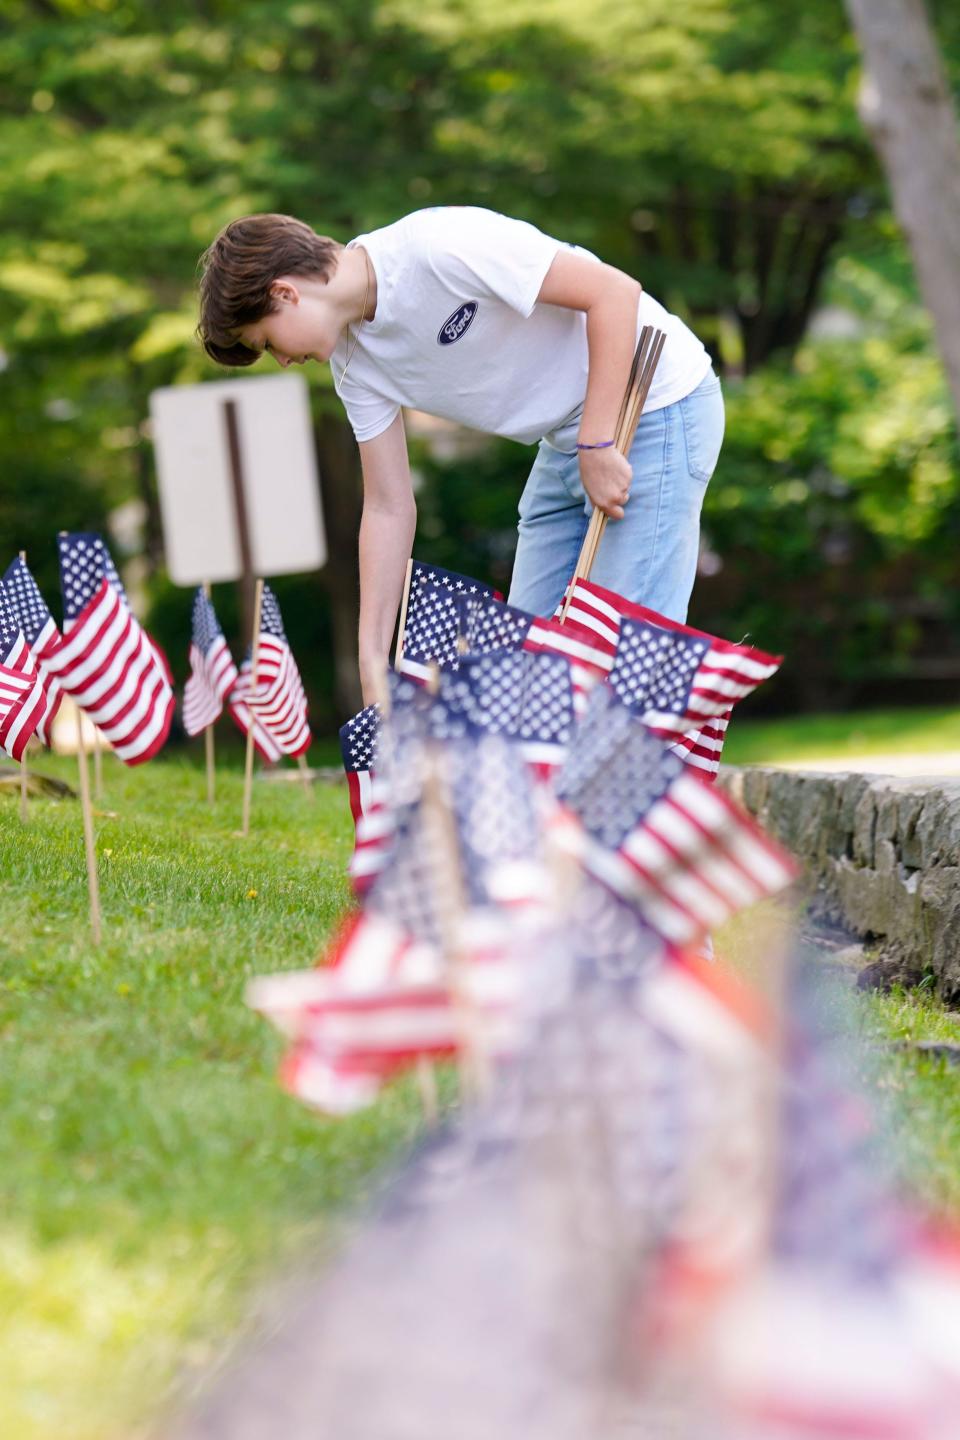 Cliffside Park High School freshman Tyler Jerred places American flags along the front lawn of the high school with other student volunteers to honor those who died in combat ahead of Memorial Day on Monday, May 22, 2023.